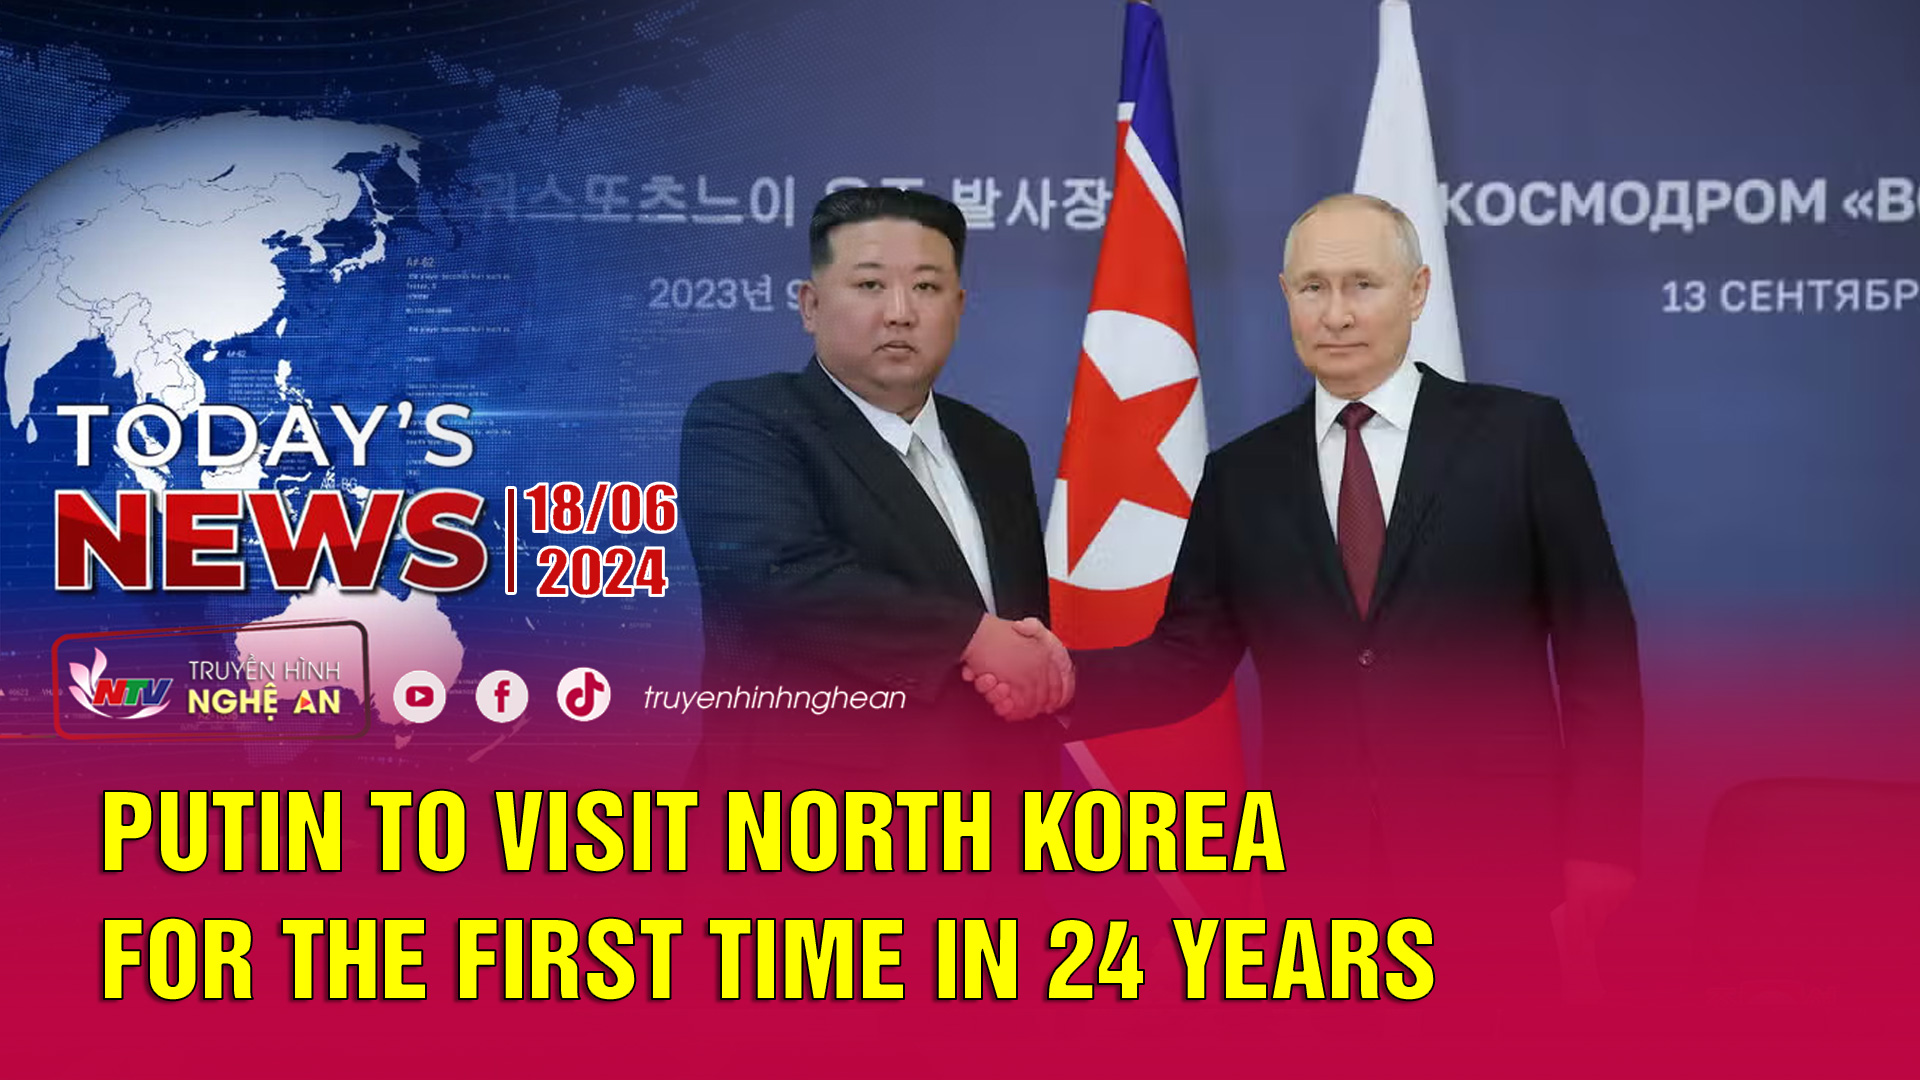 Today's News 18/6/2024: Putin to visit North Korea for the first time in 24 years